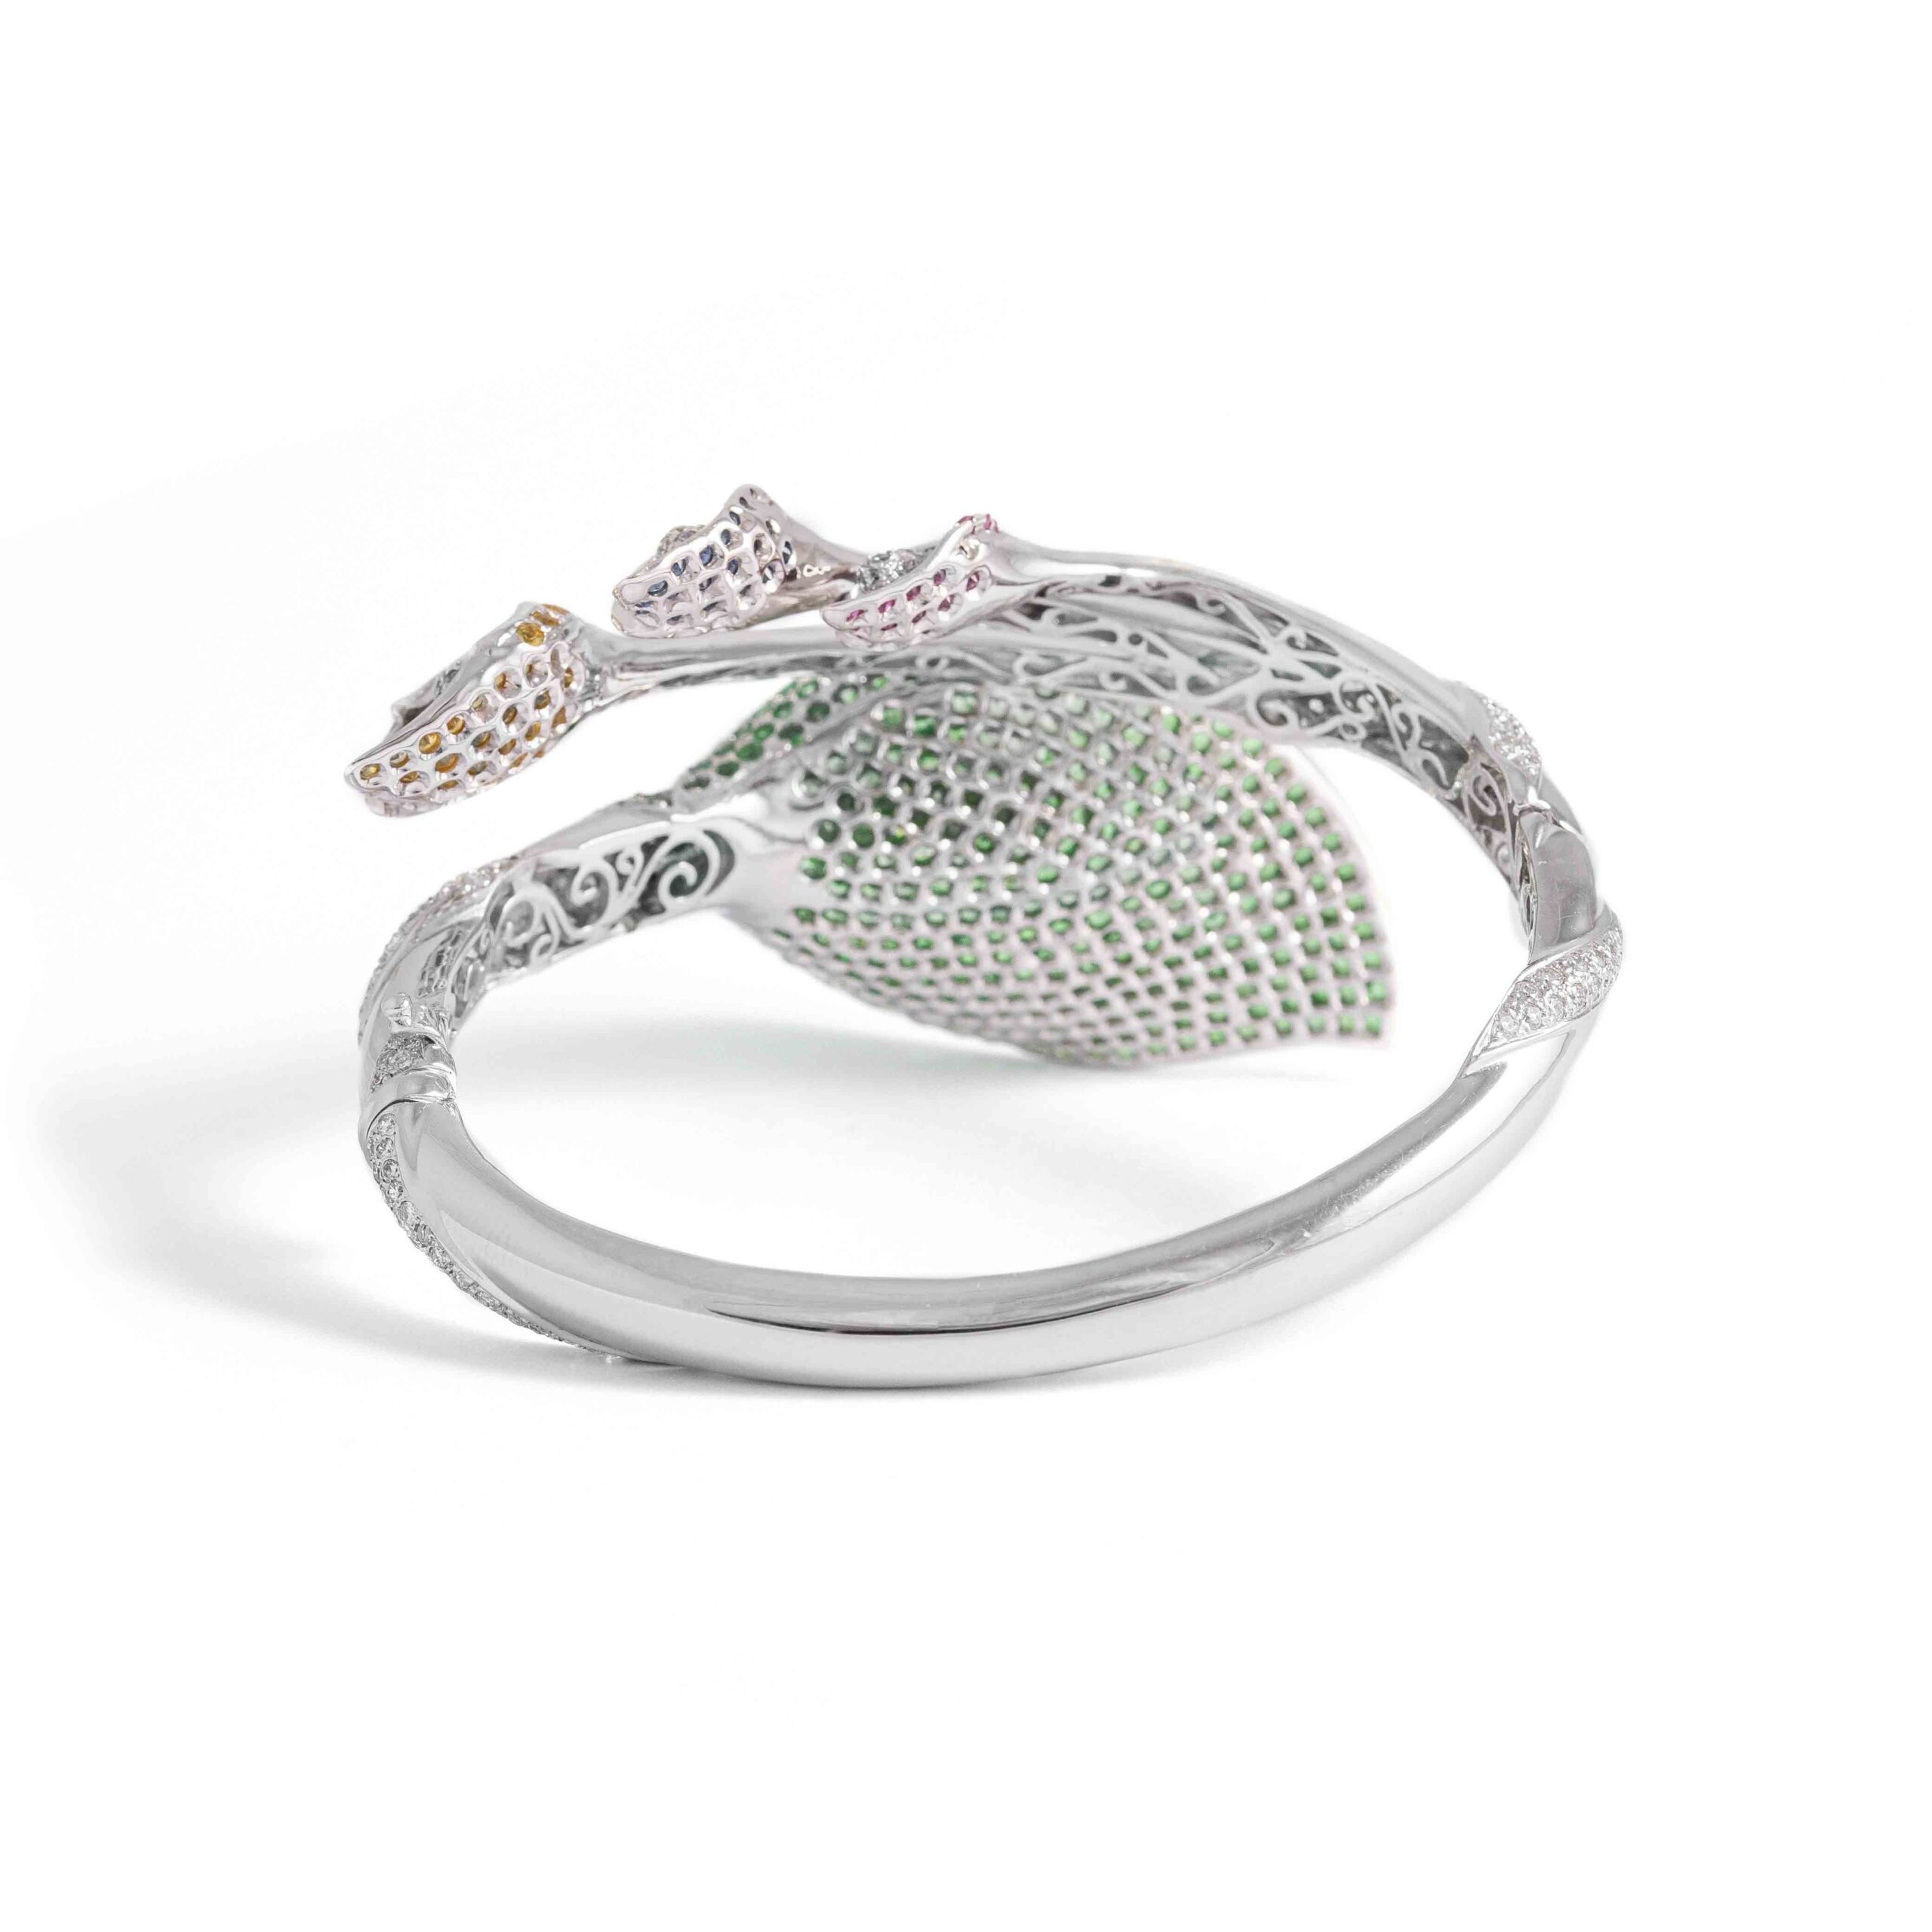 Bangle in 18kt white gold set with 301 diamonds 4.92 cts, 26 pink sapphires 0.53 cts, 343 green sapphires 7.12 cts and 36 sapphires 0.61 cts and 53 yellow sapphires 1.25 cts    